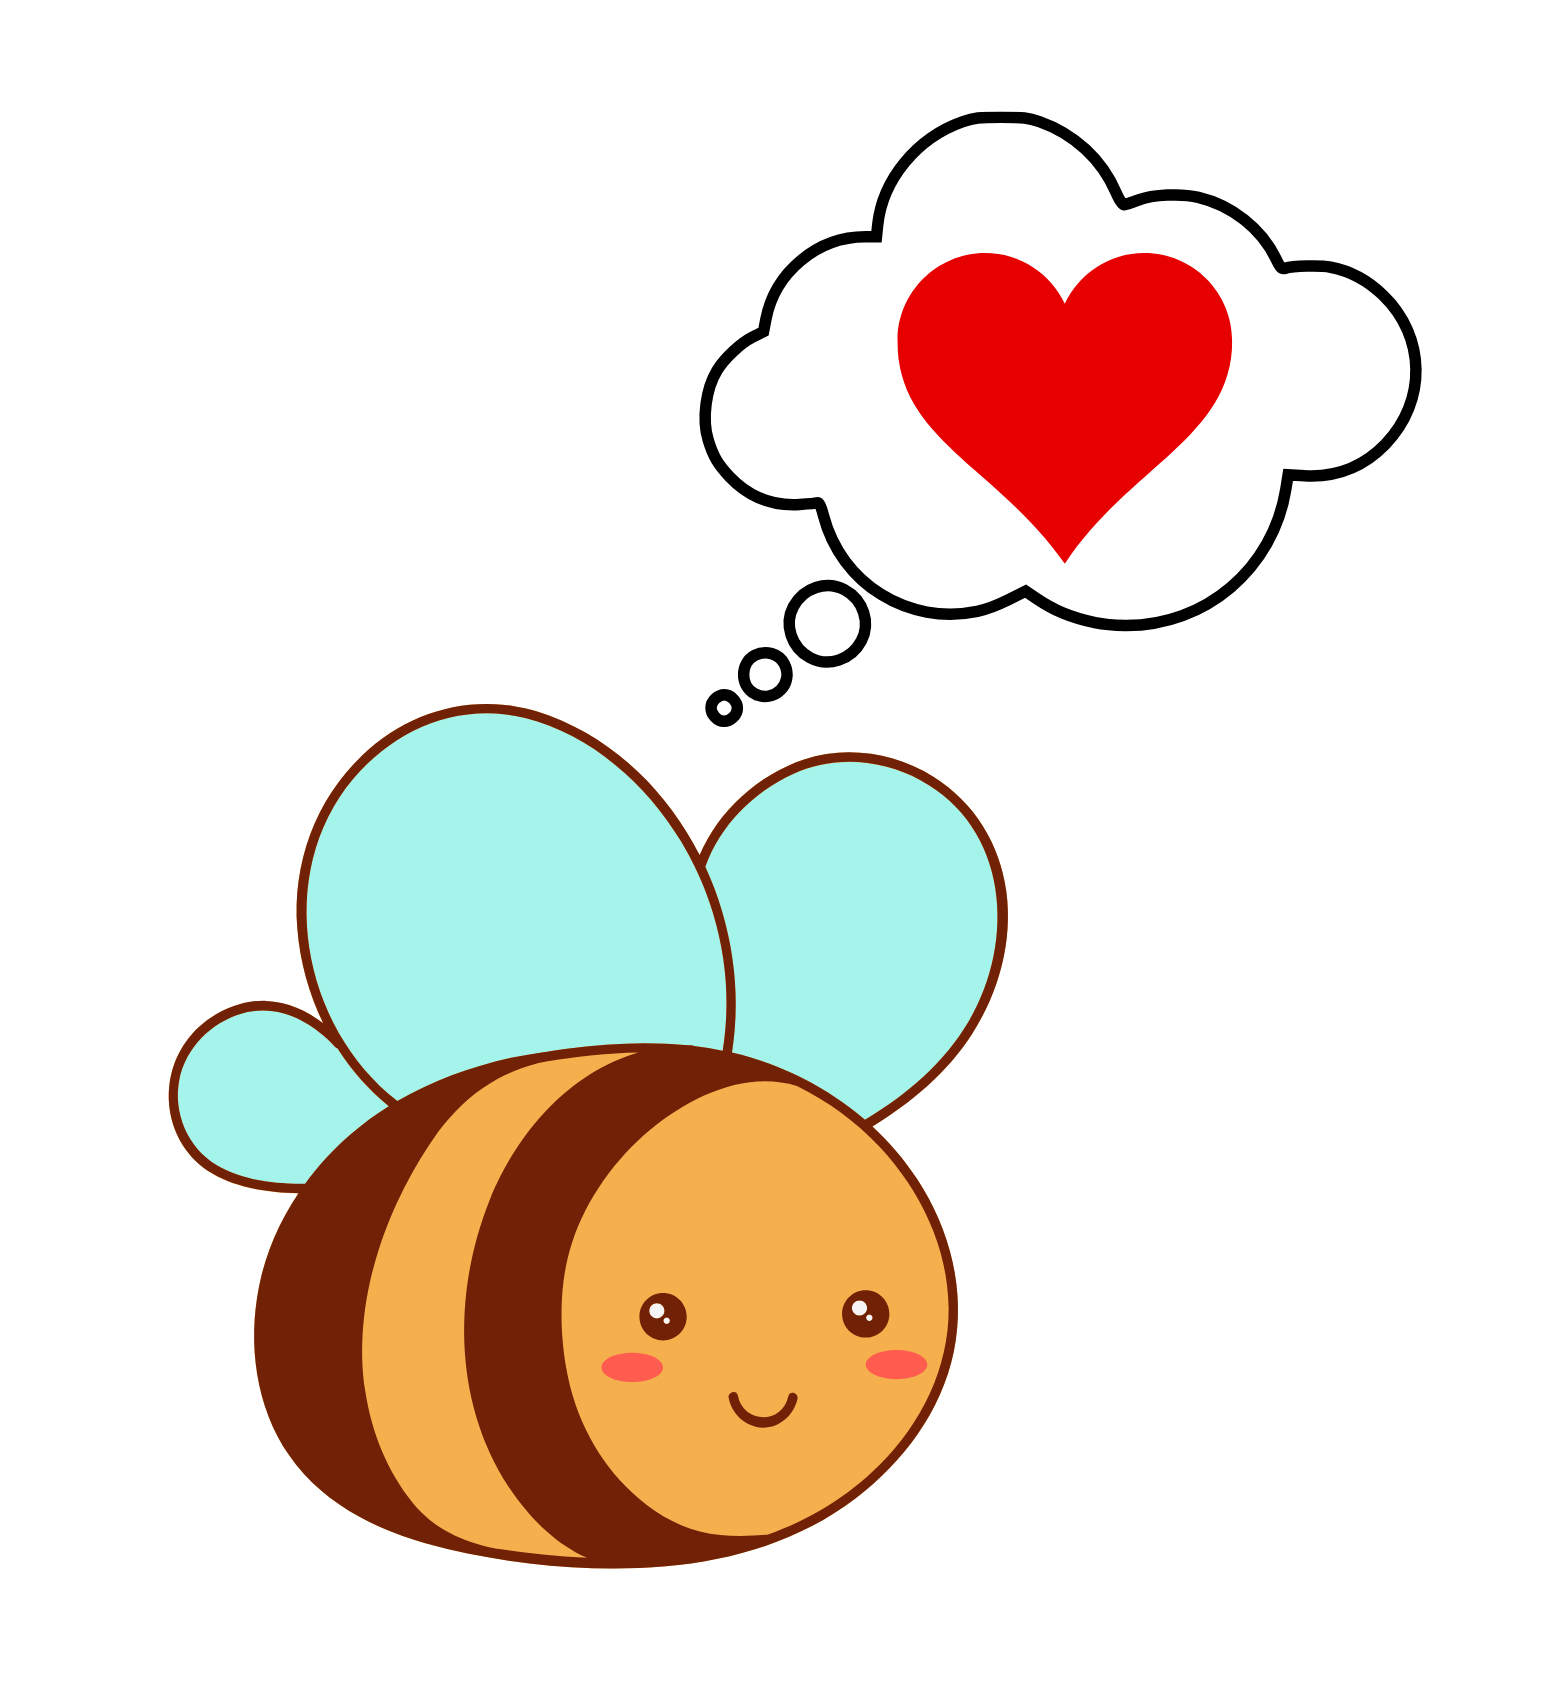 Bee with heart